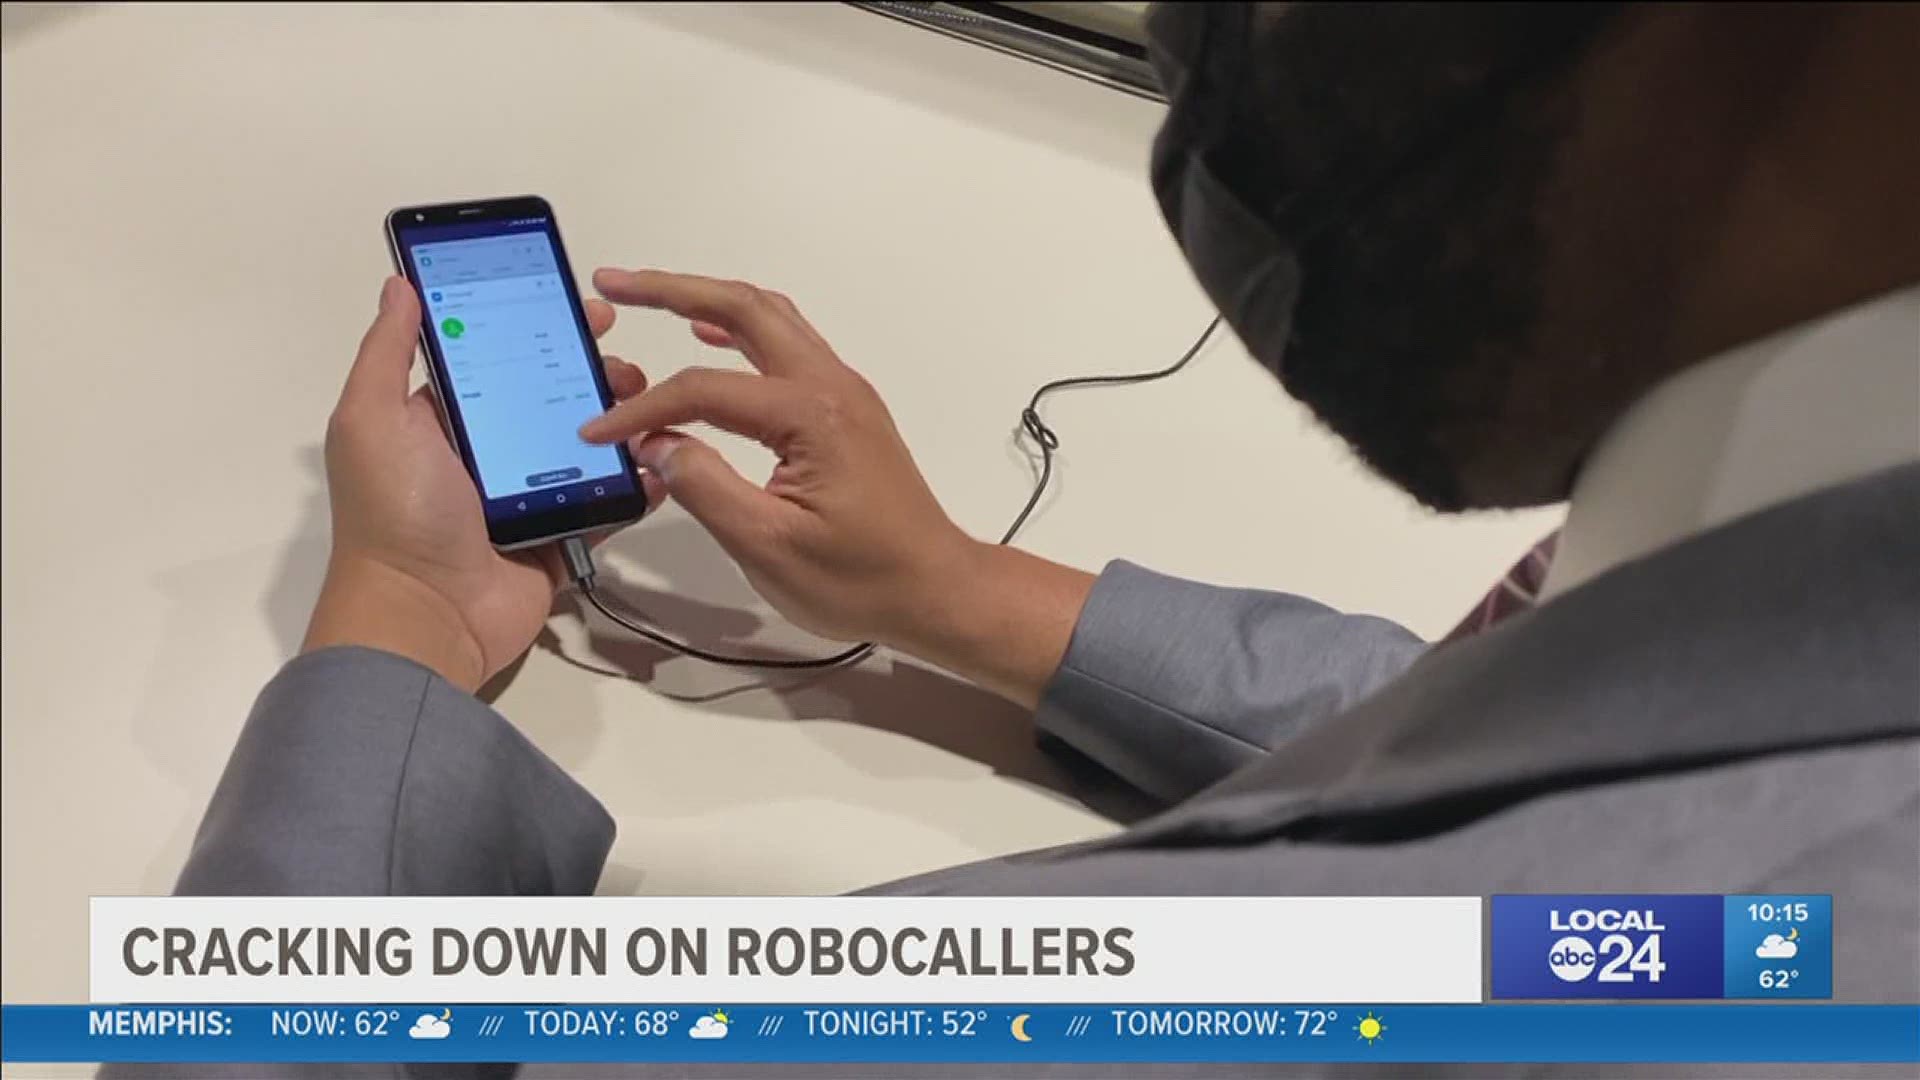 Our investigative team bought new phones all over the U.S. and measured when they got spam calls, as efforts to crackdown on billions of robocalls roll out.